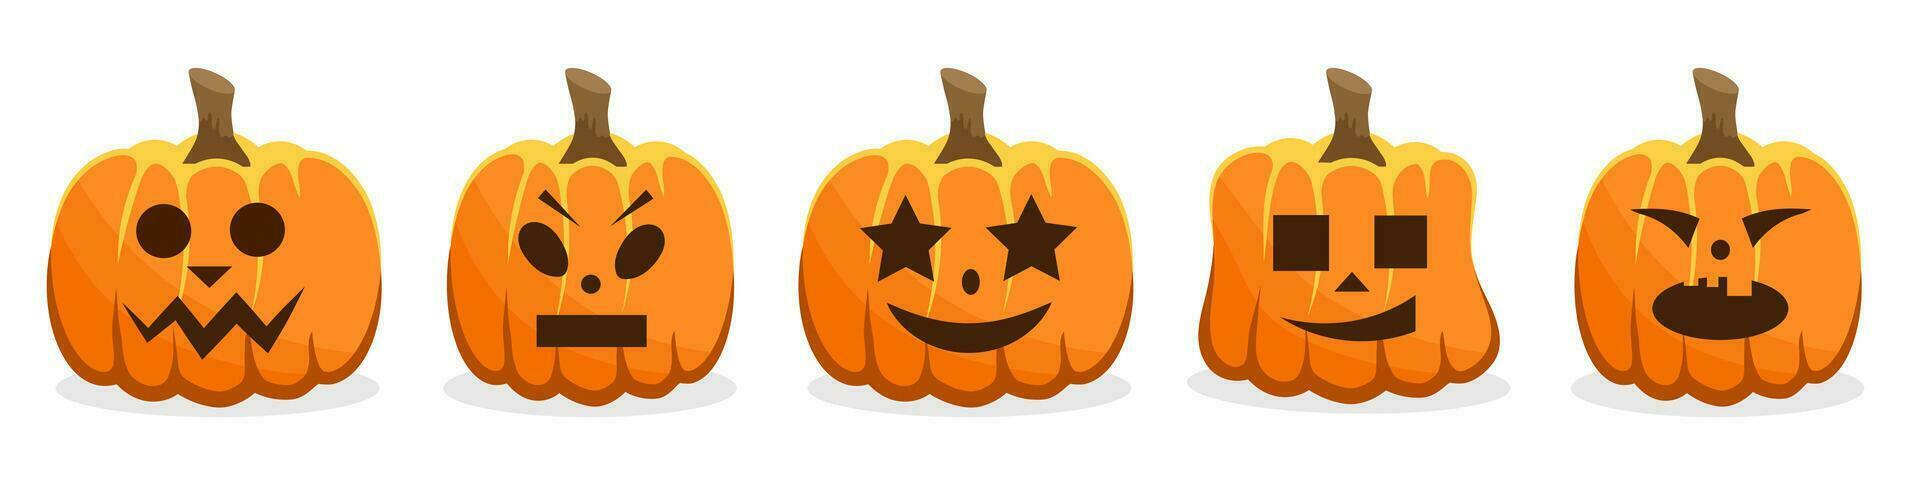 Pumpkins with different emotions vector